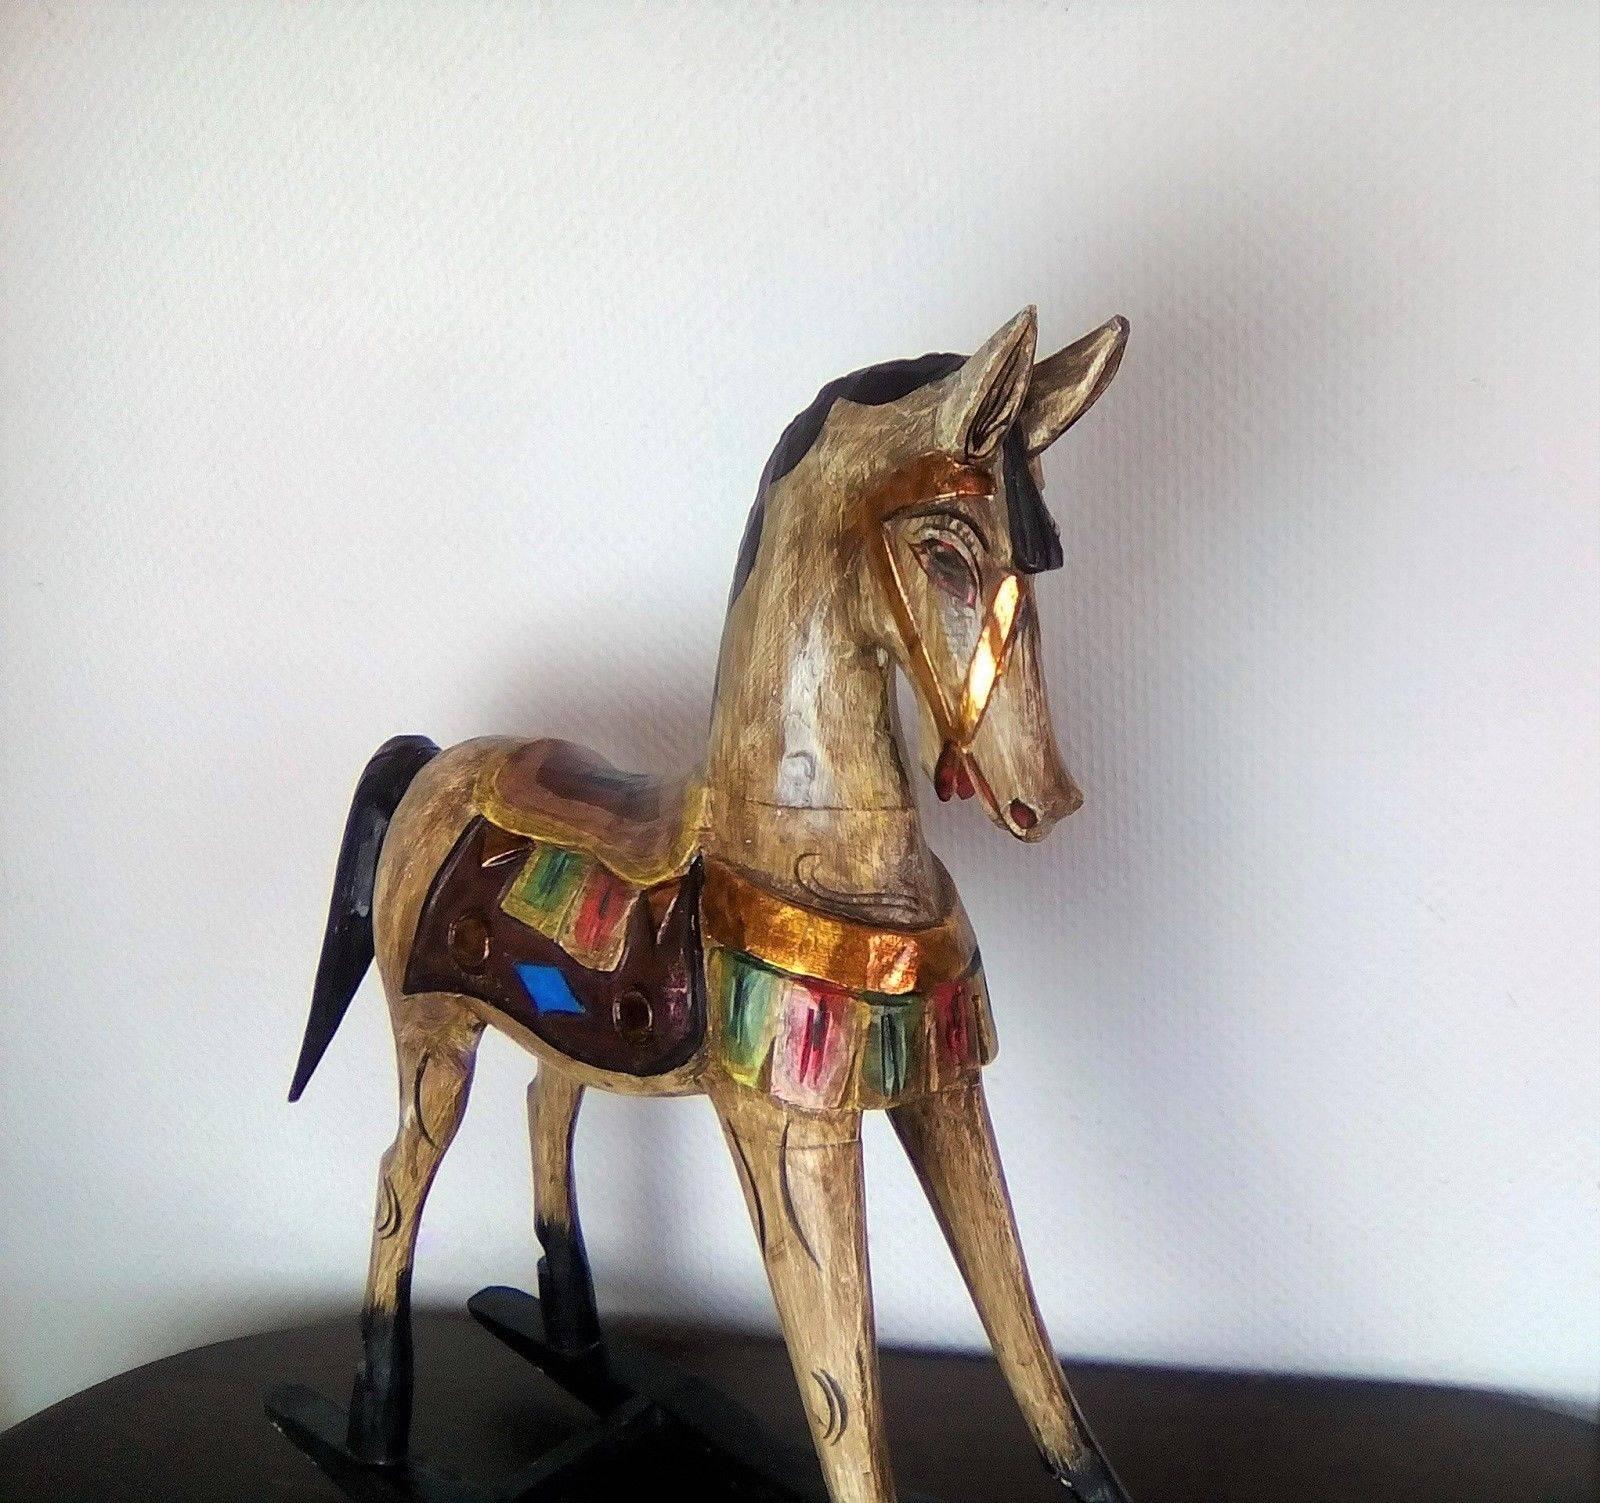 French vintage hand-carved wood and hand-painted rocking horse, home decor horse, circa 1960 - fully handcrafted.